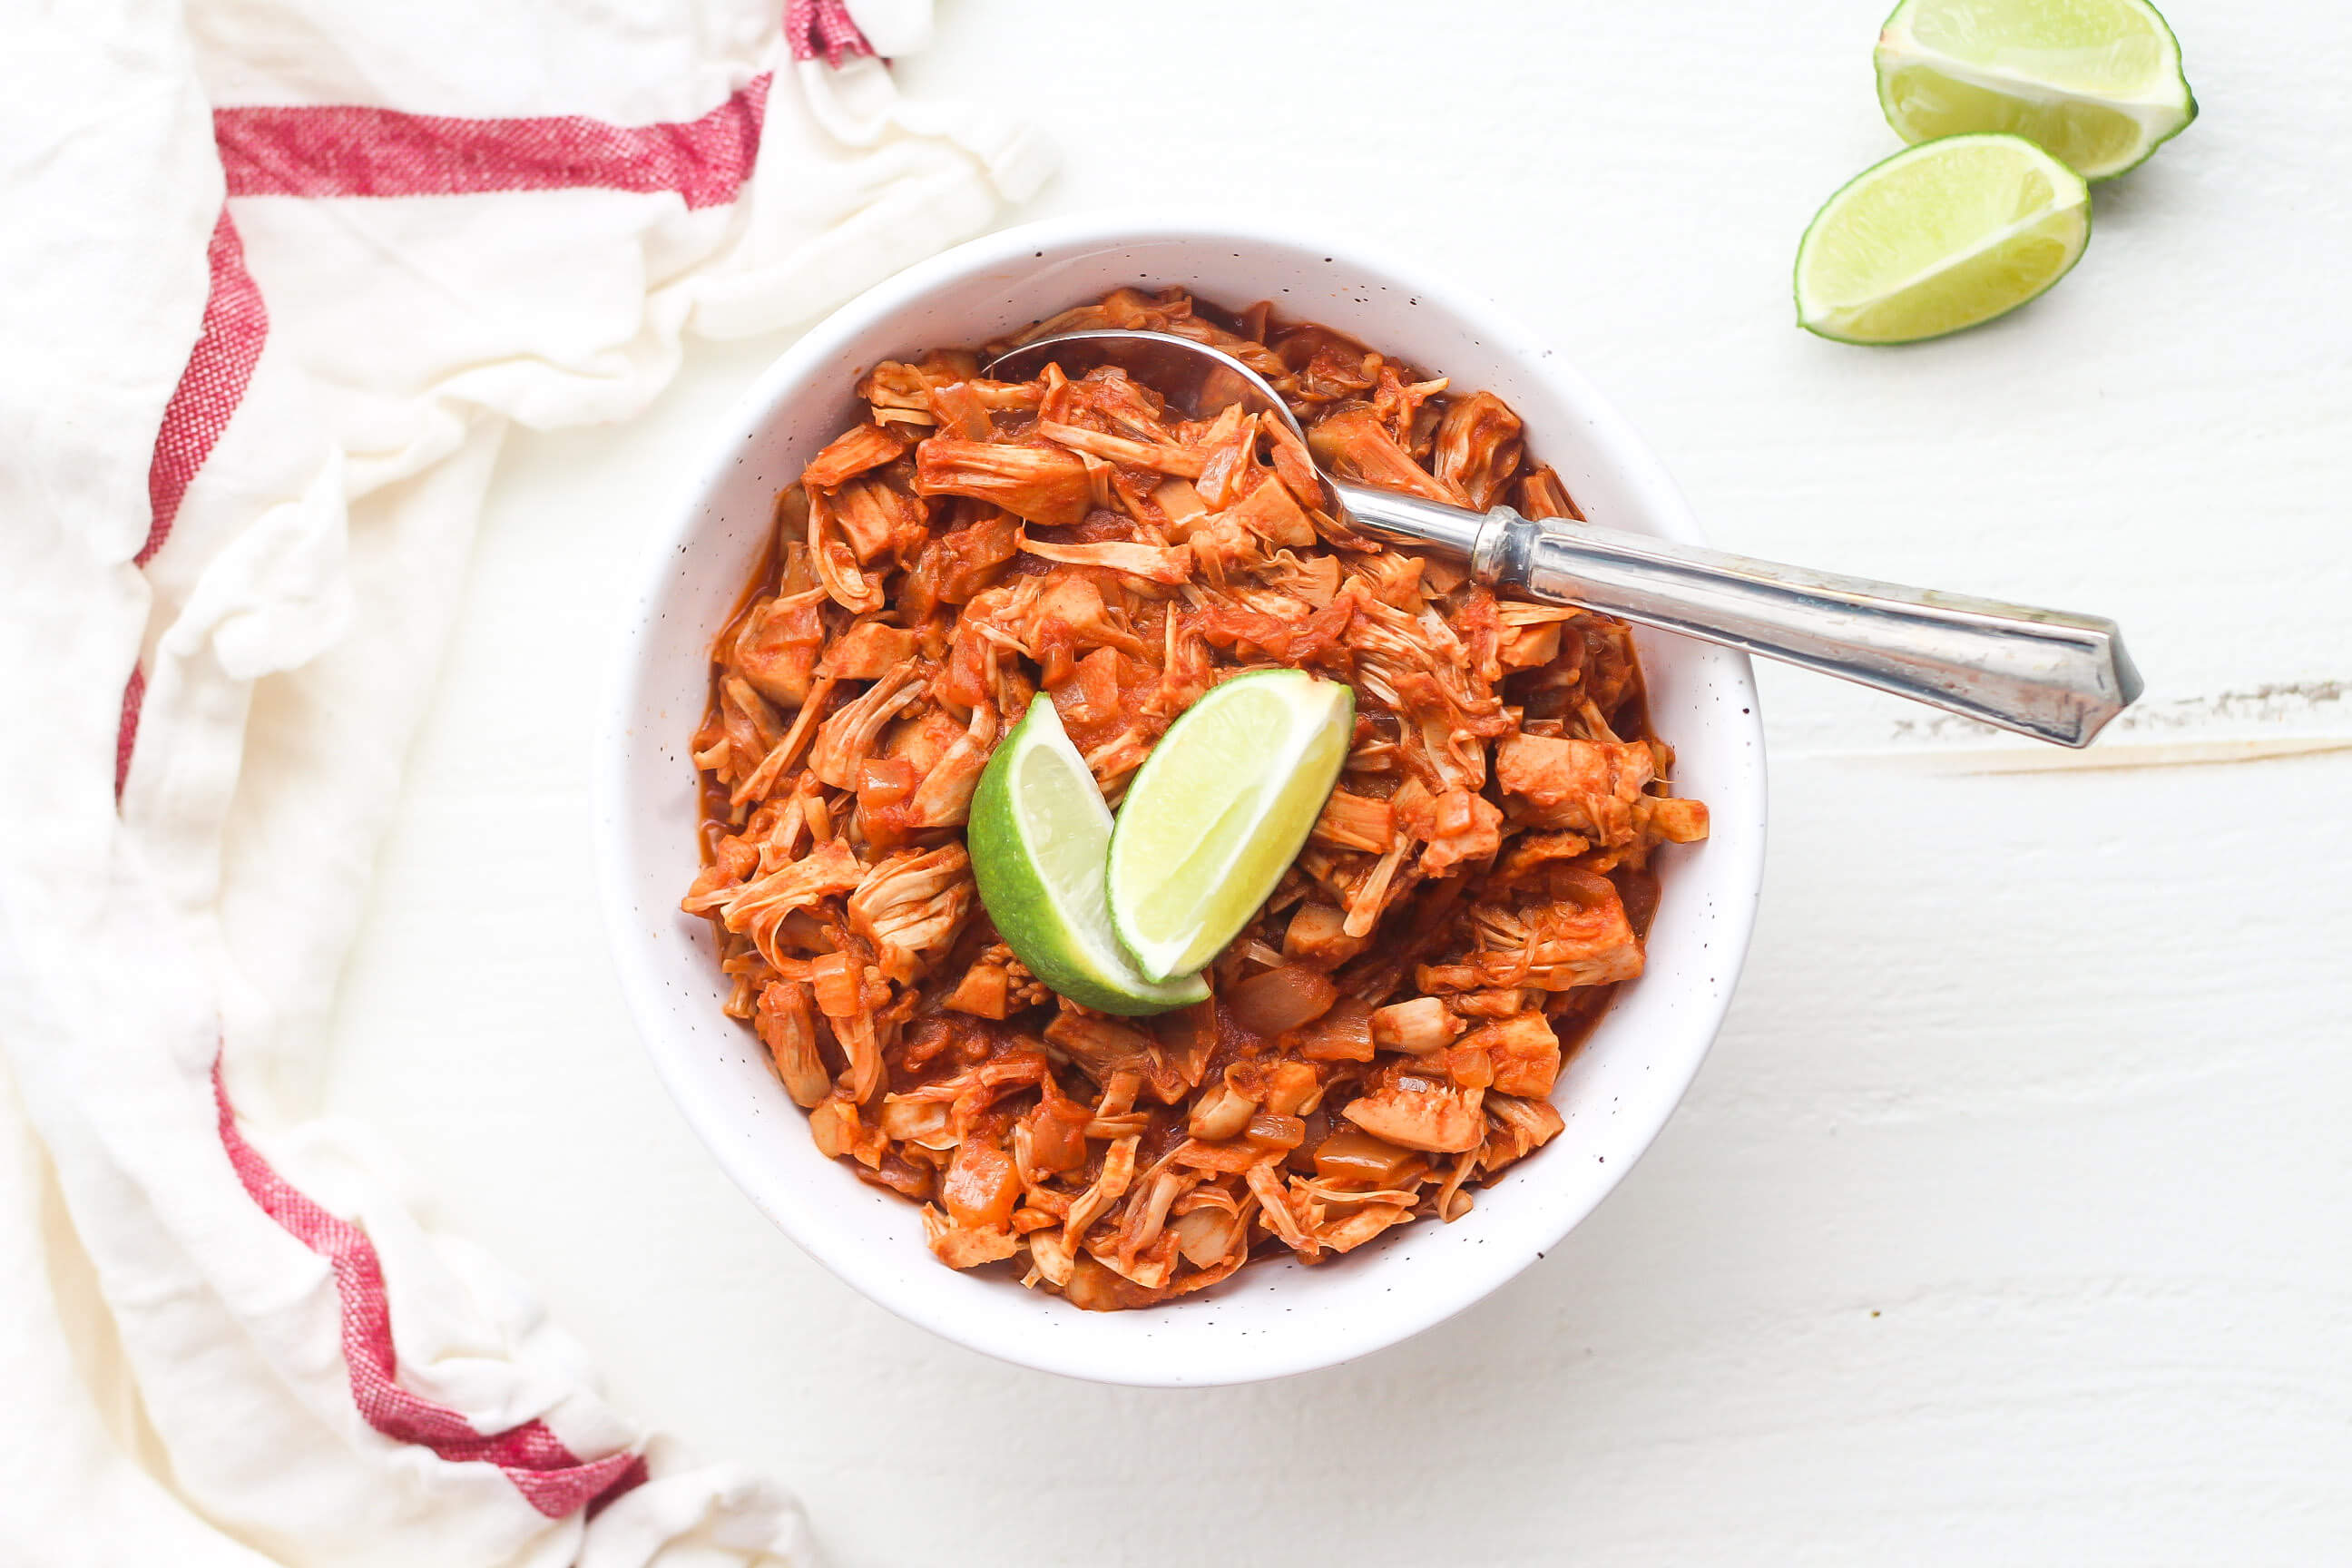 20 Low-Fat Oil-Free Meals Your Clients Will Love: Pressure Cooker Pulled Jackfruit